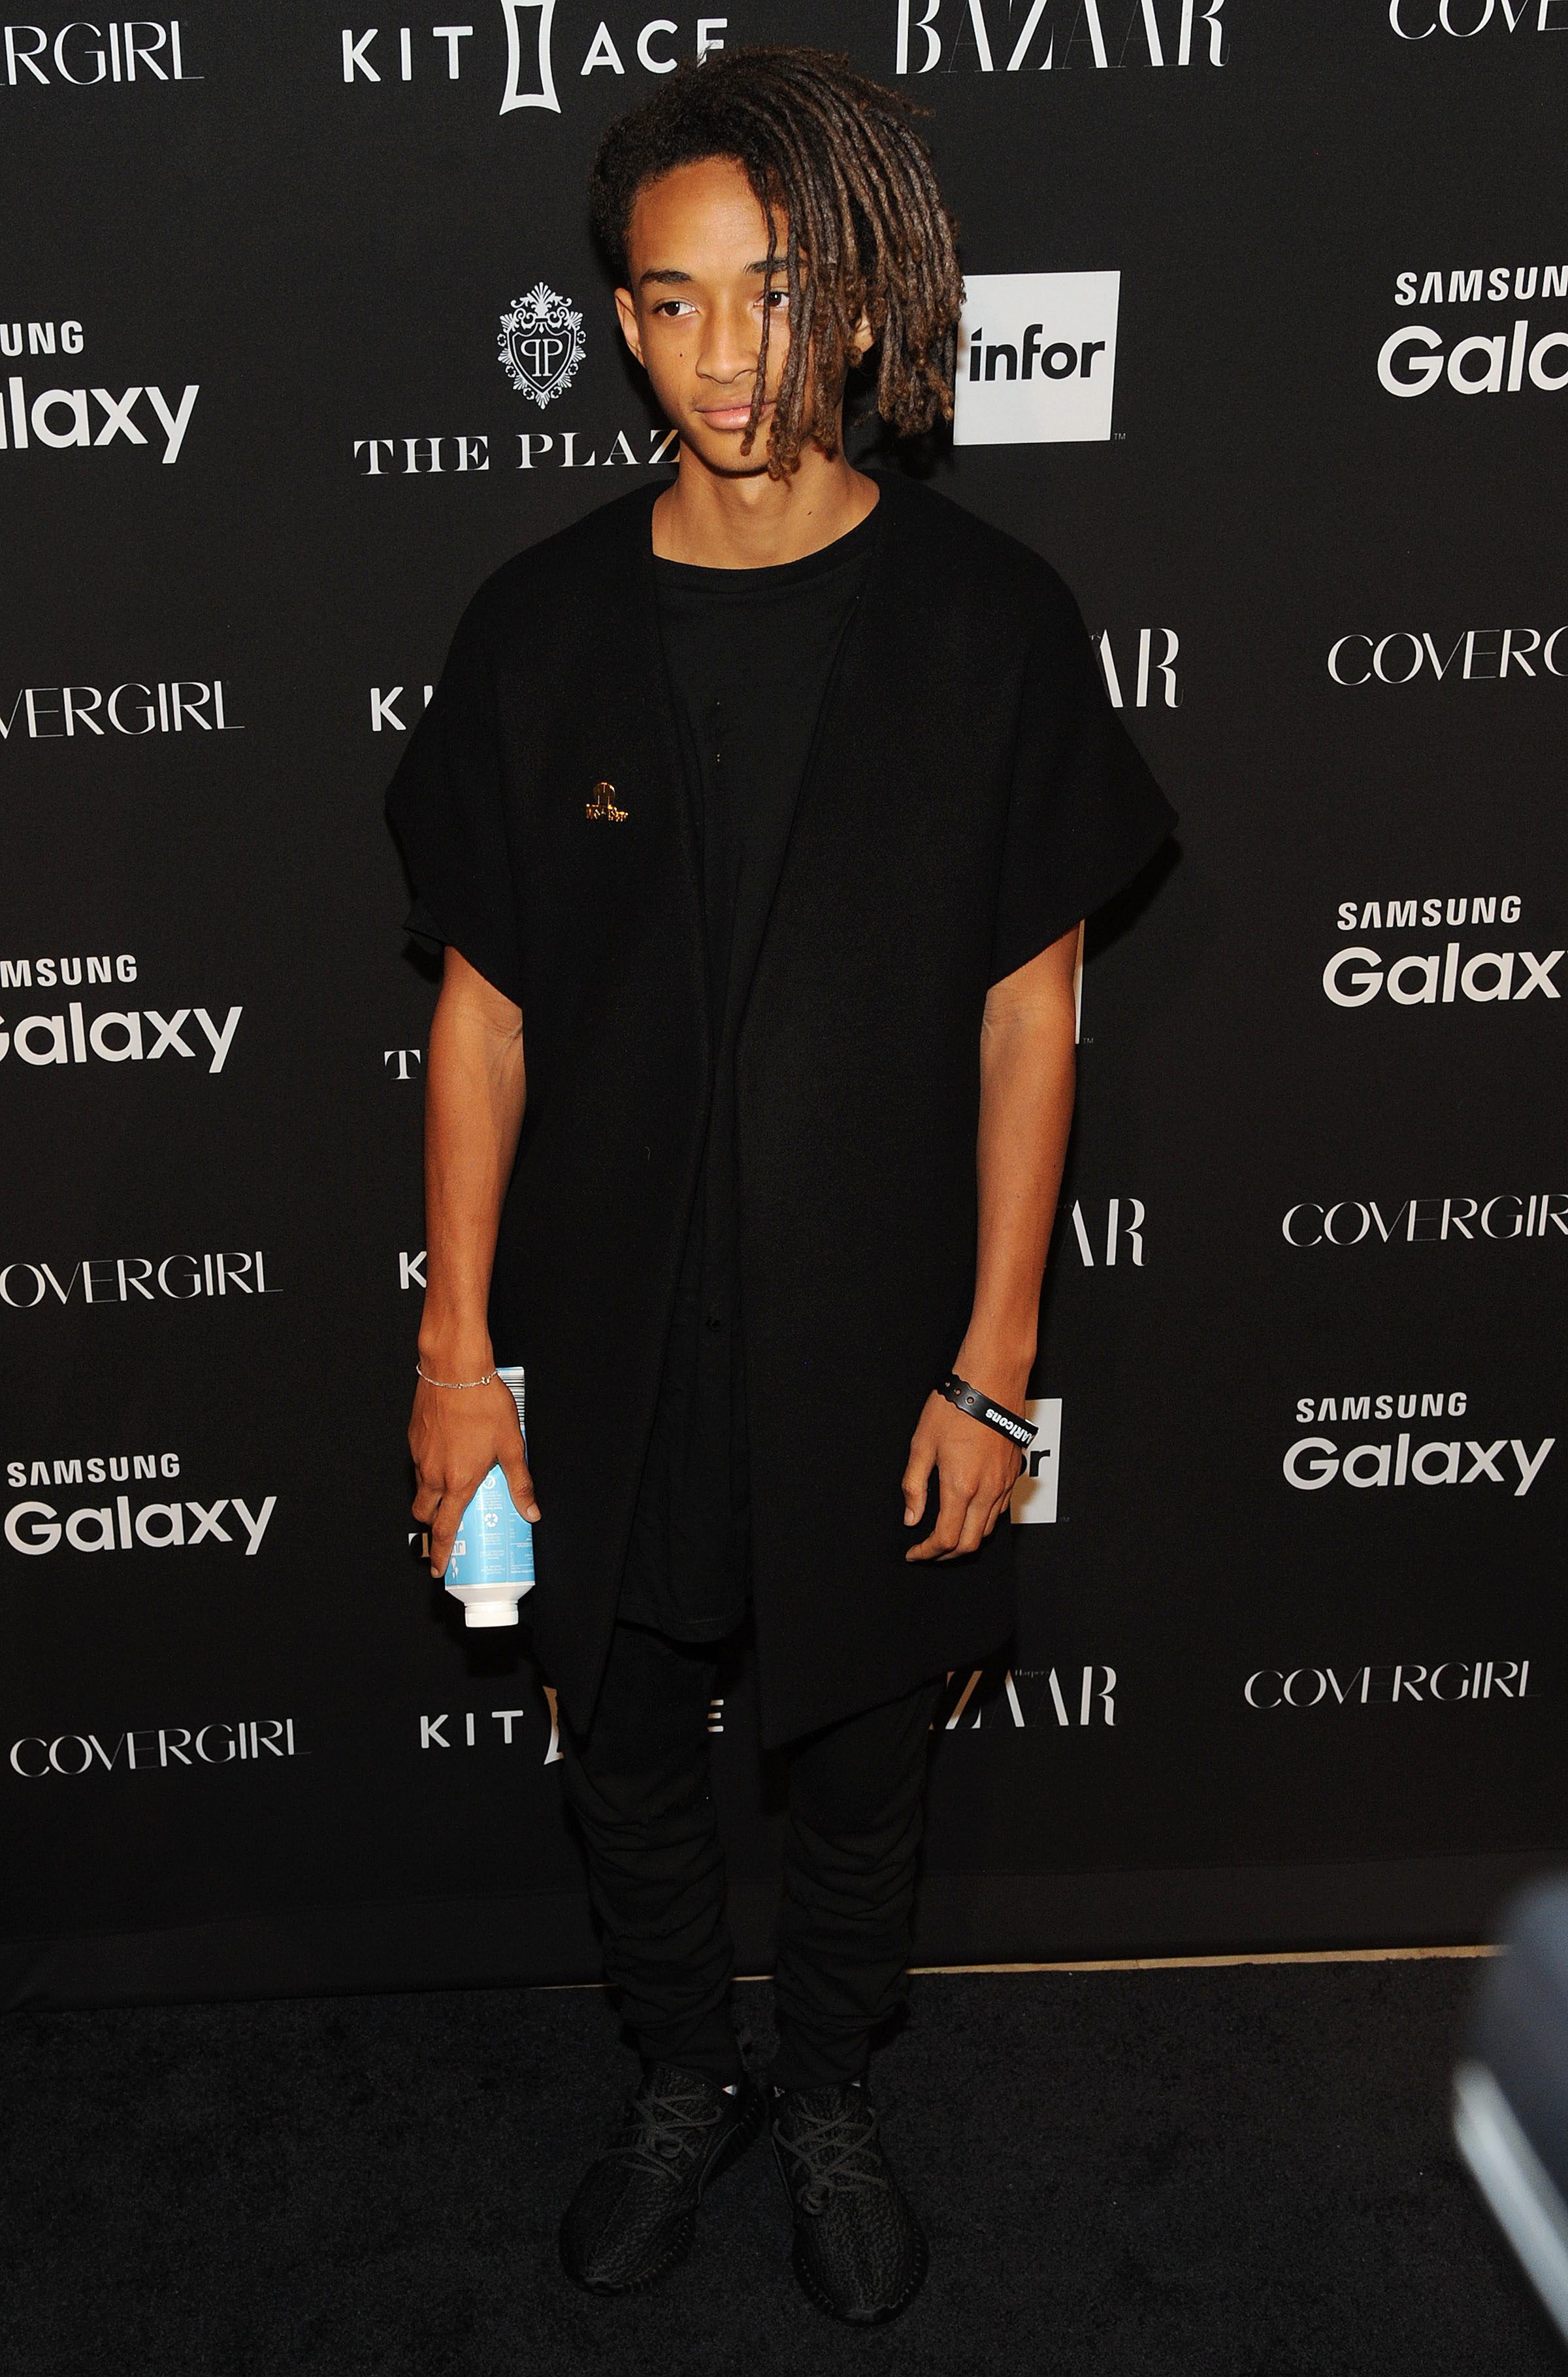 SPOTTED: Jaden Smith At The Louis Vuitton Exhibition In Louis Vuitton Bag  And Sneakers – PAUSE Online